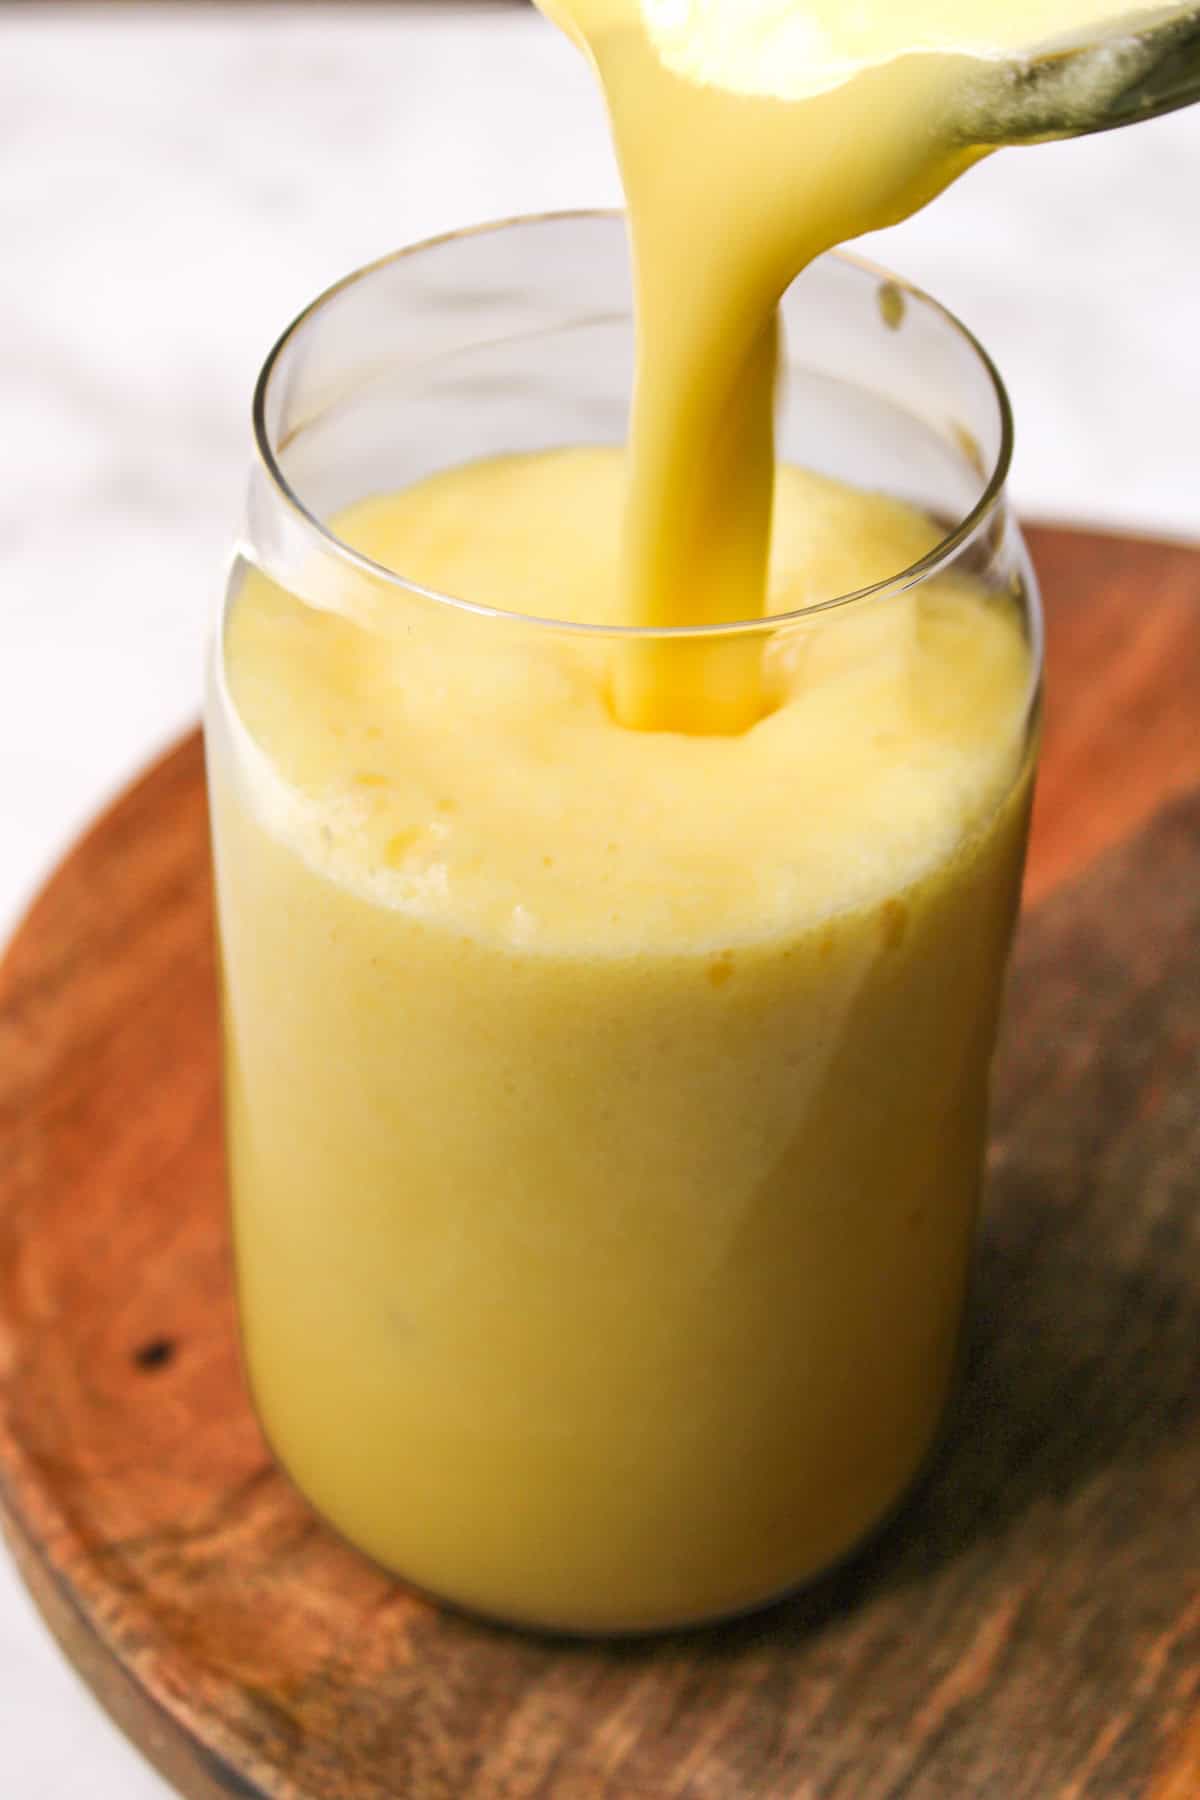 pina colada being poured into a tall glass on a wooden board